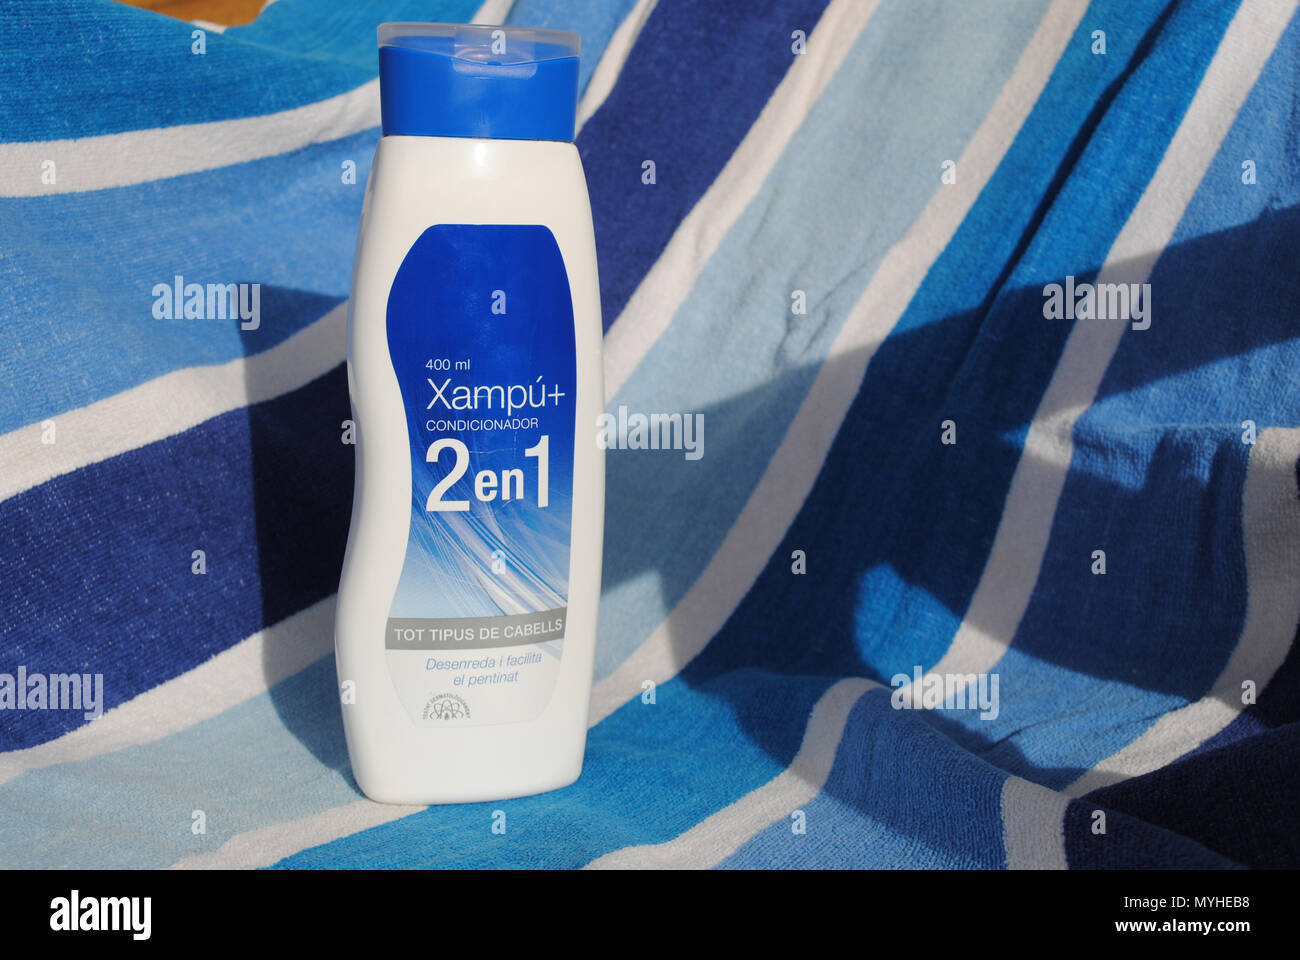 Locally made hair care product featuring all information on its label in Catalan. Stock Photo